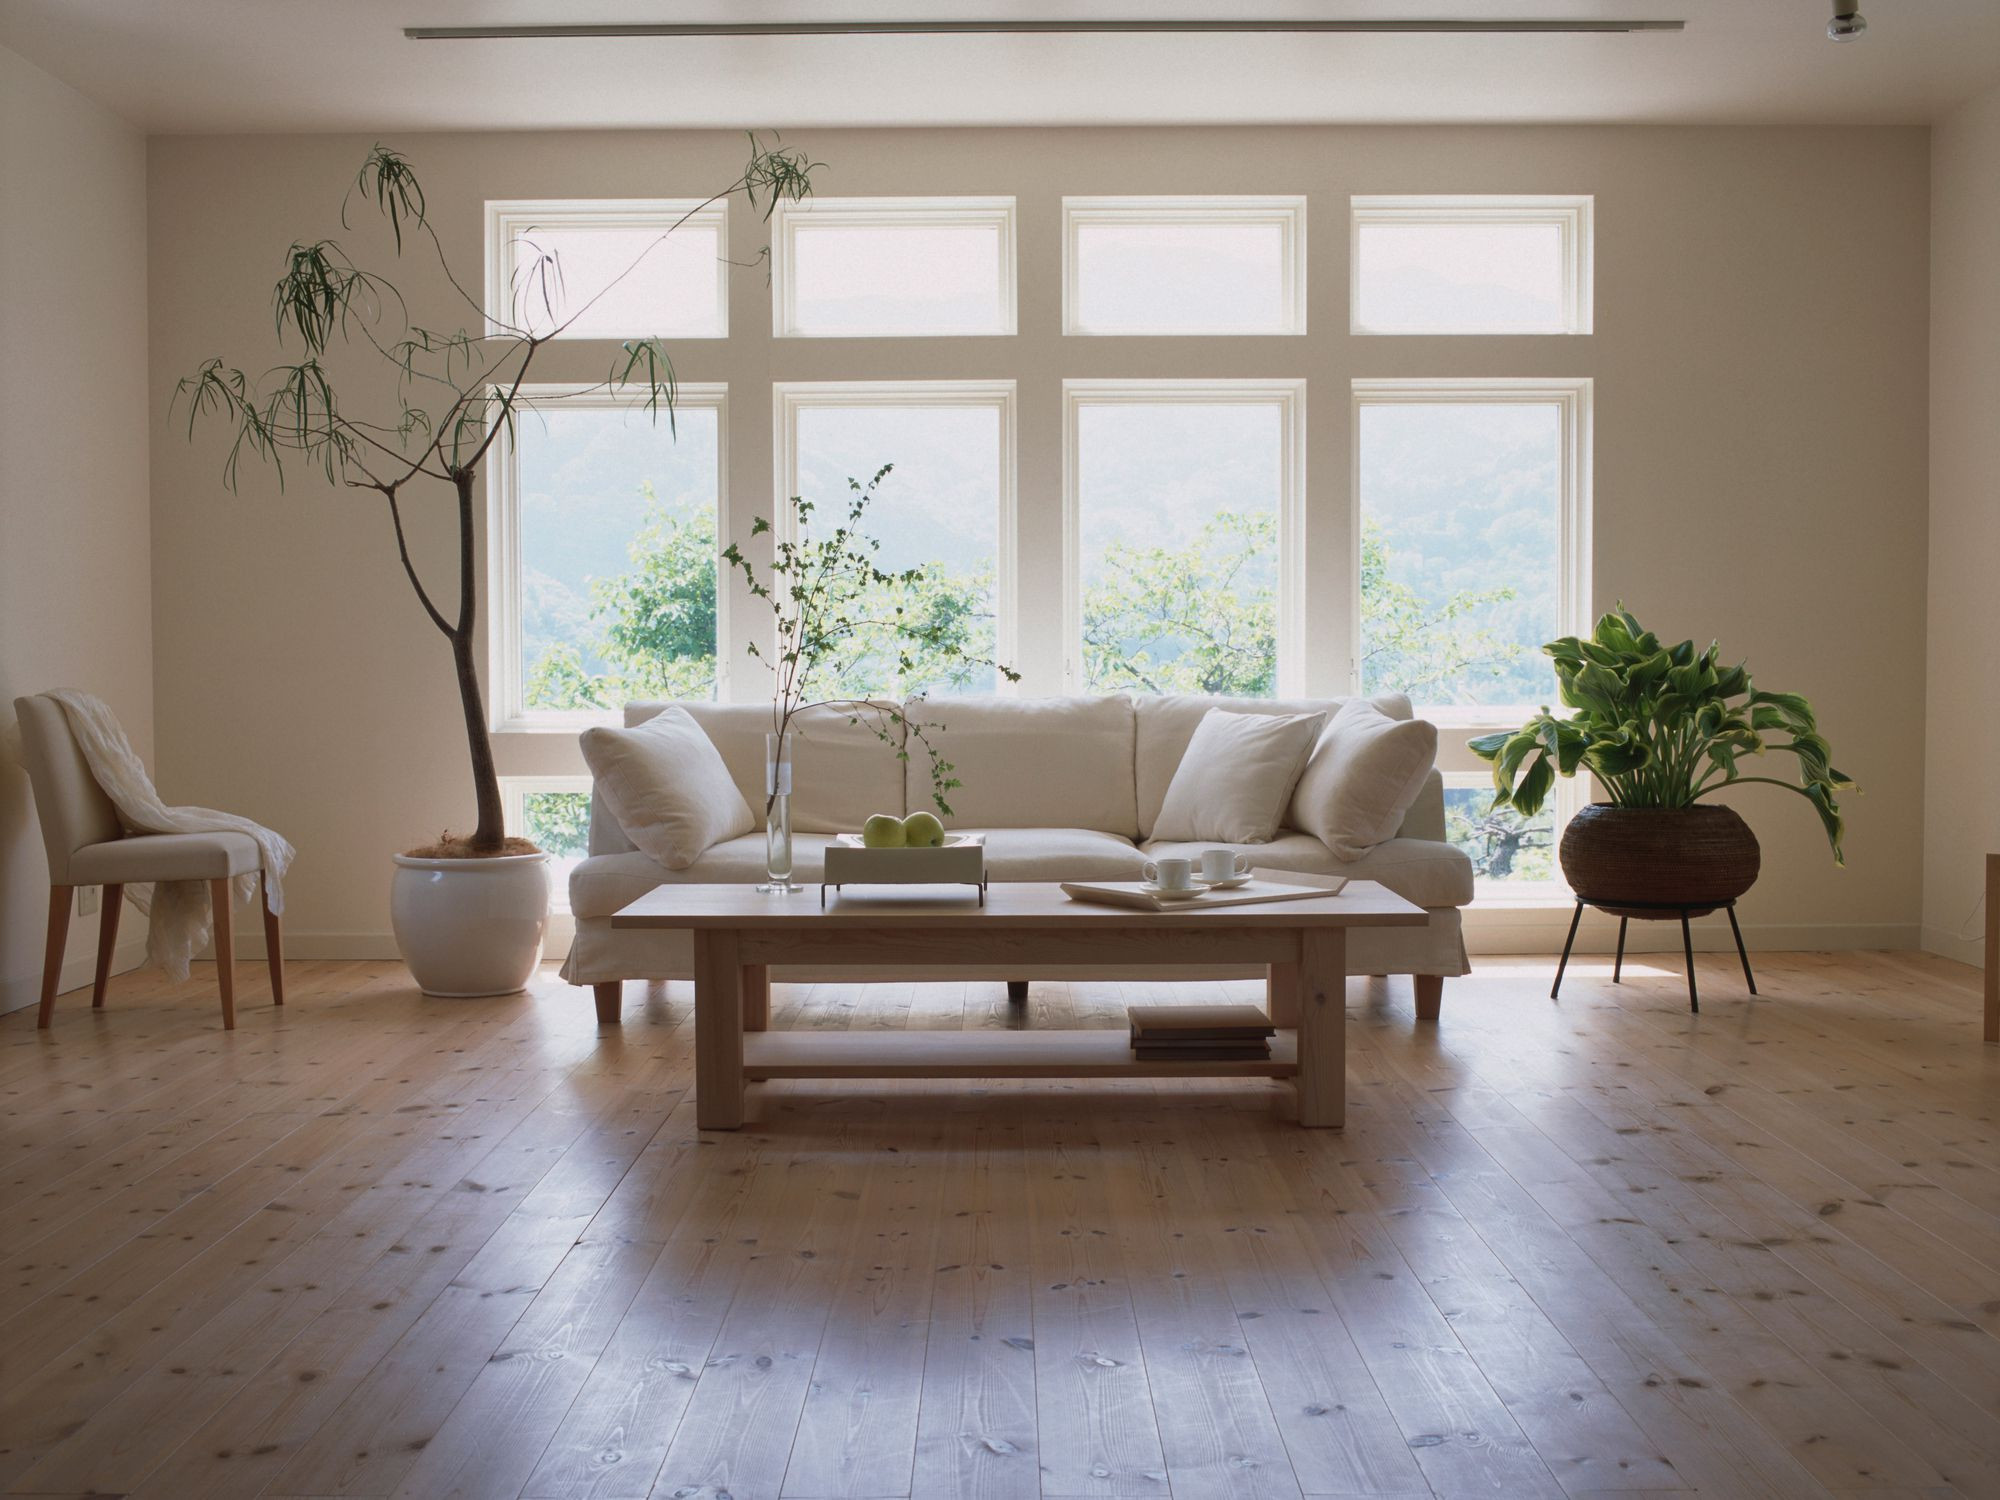 Floor and Decor Hardwood Flooring Of Laminate Flooring Pros and Cons Pertaining to Living Room Laminate Floor Gettyimages Dexph070 001 58b5cc793df78cdcd8be2938